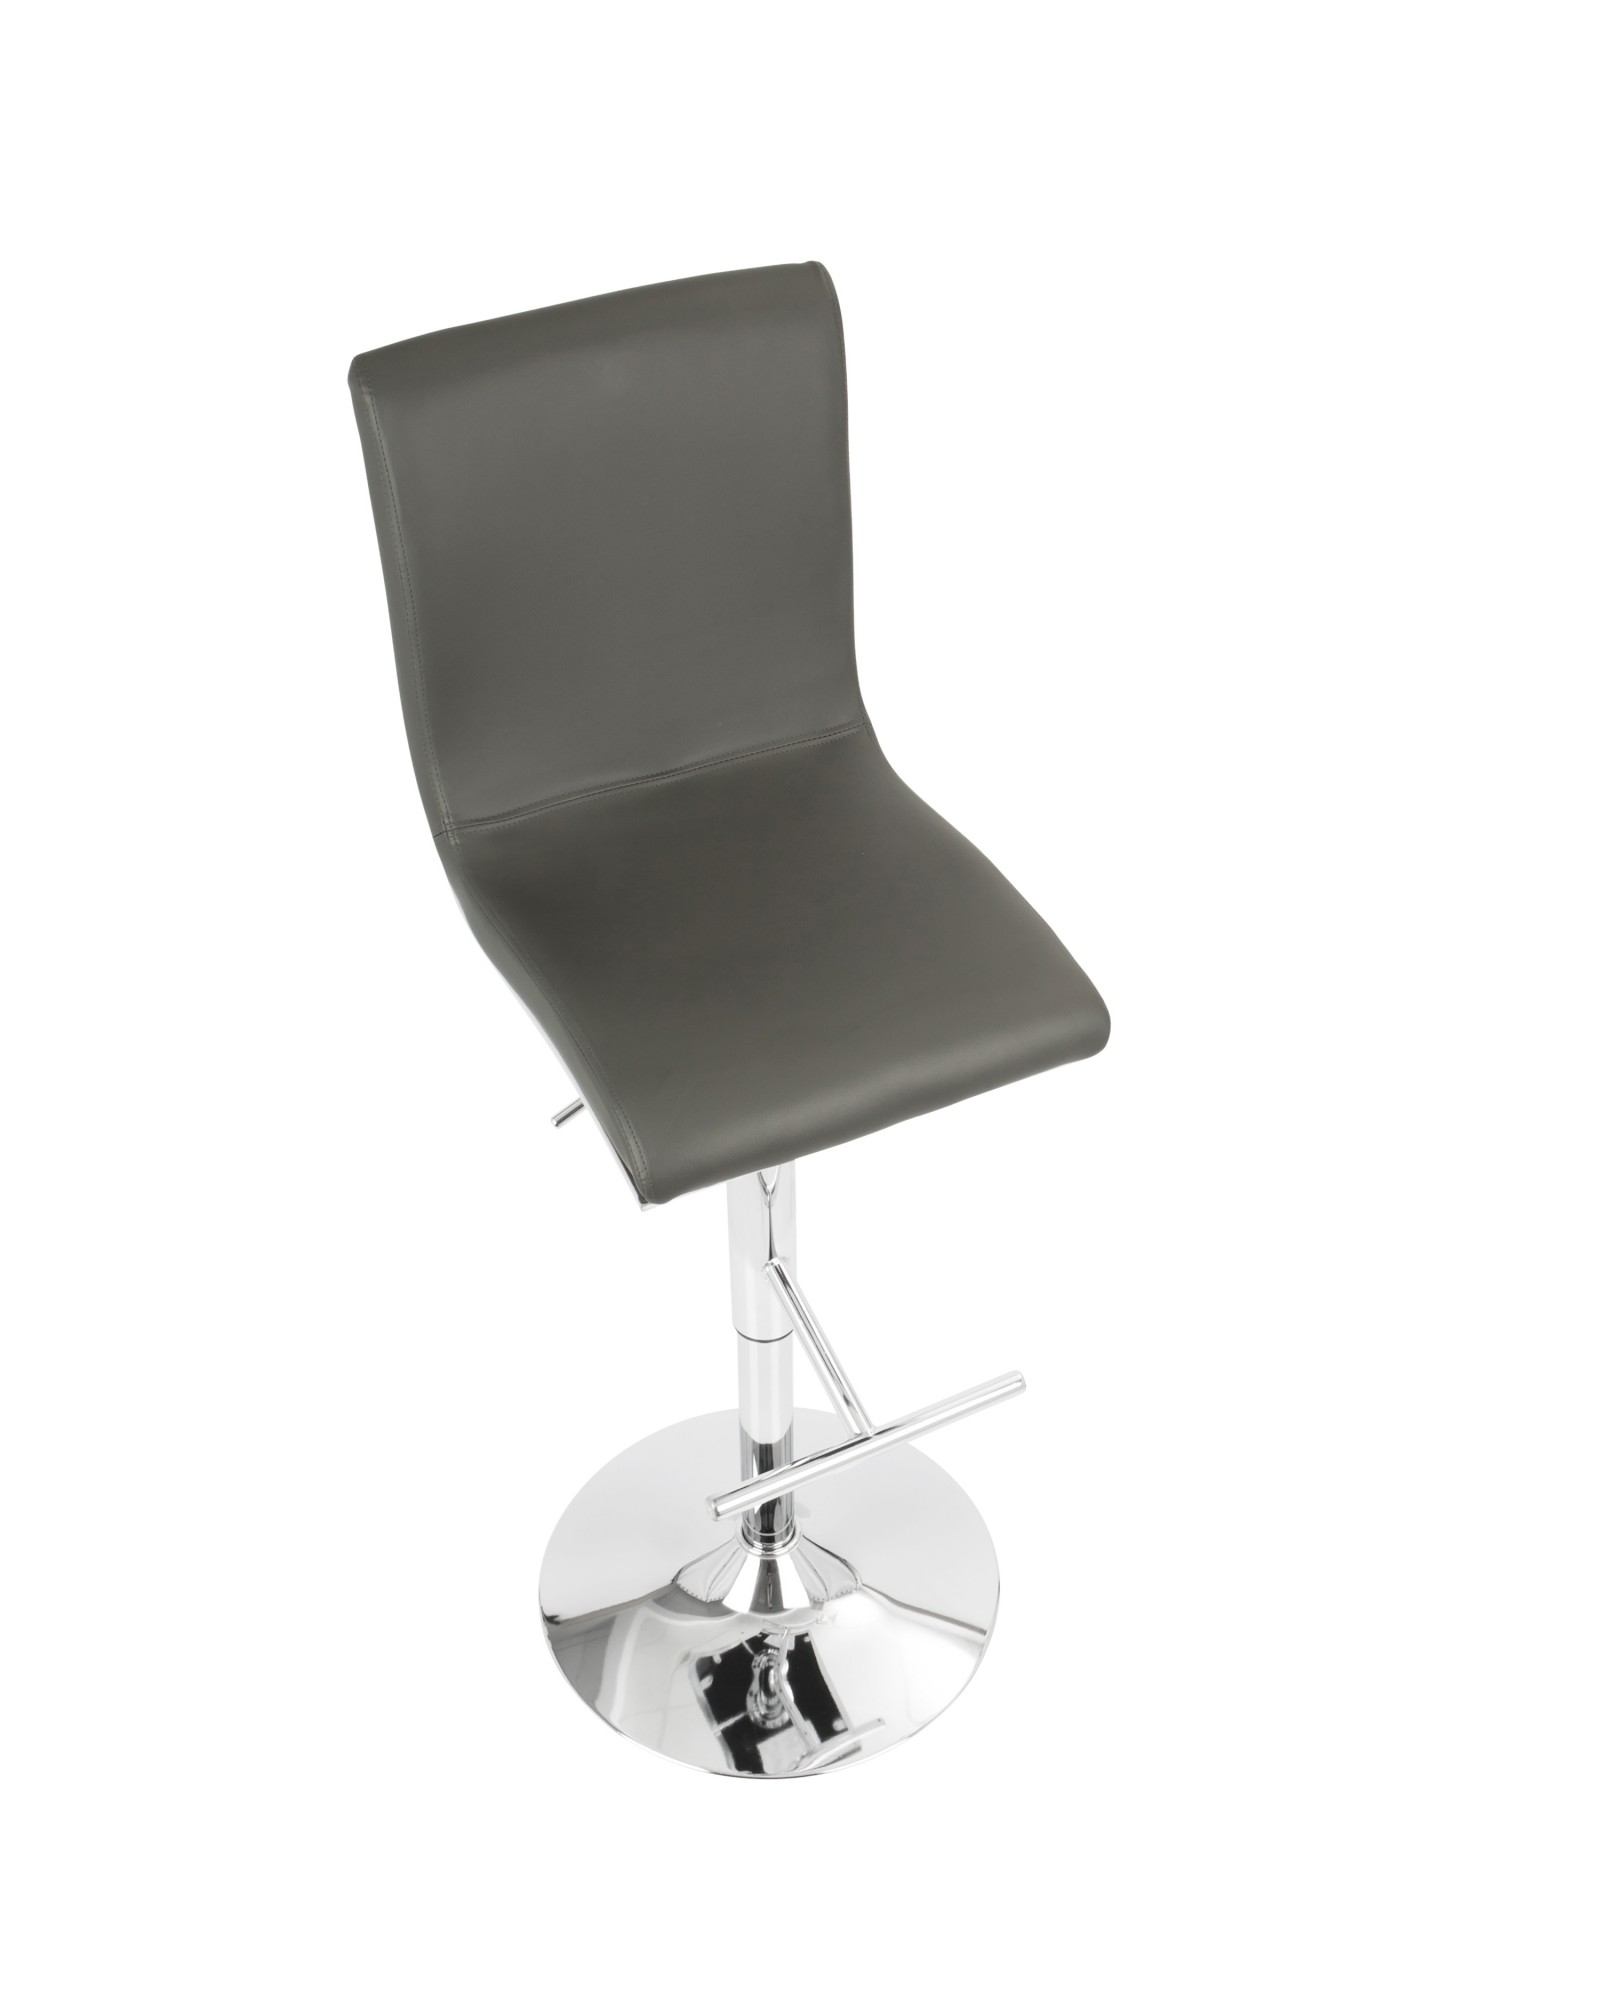 Spago Contemporary Adjustable Barstool with Swivel in Grey Faux Leather